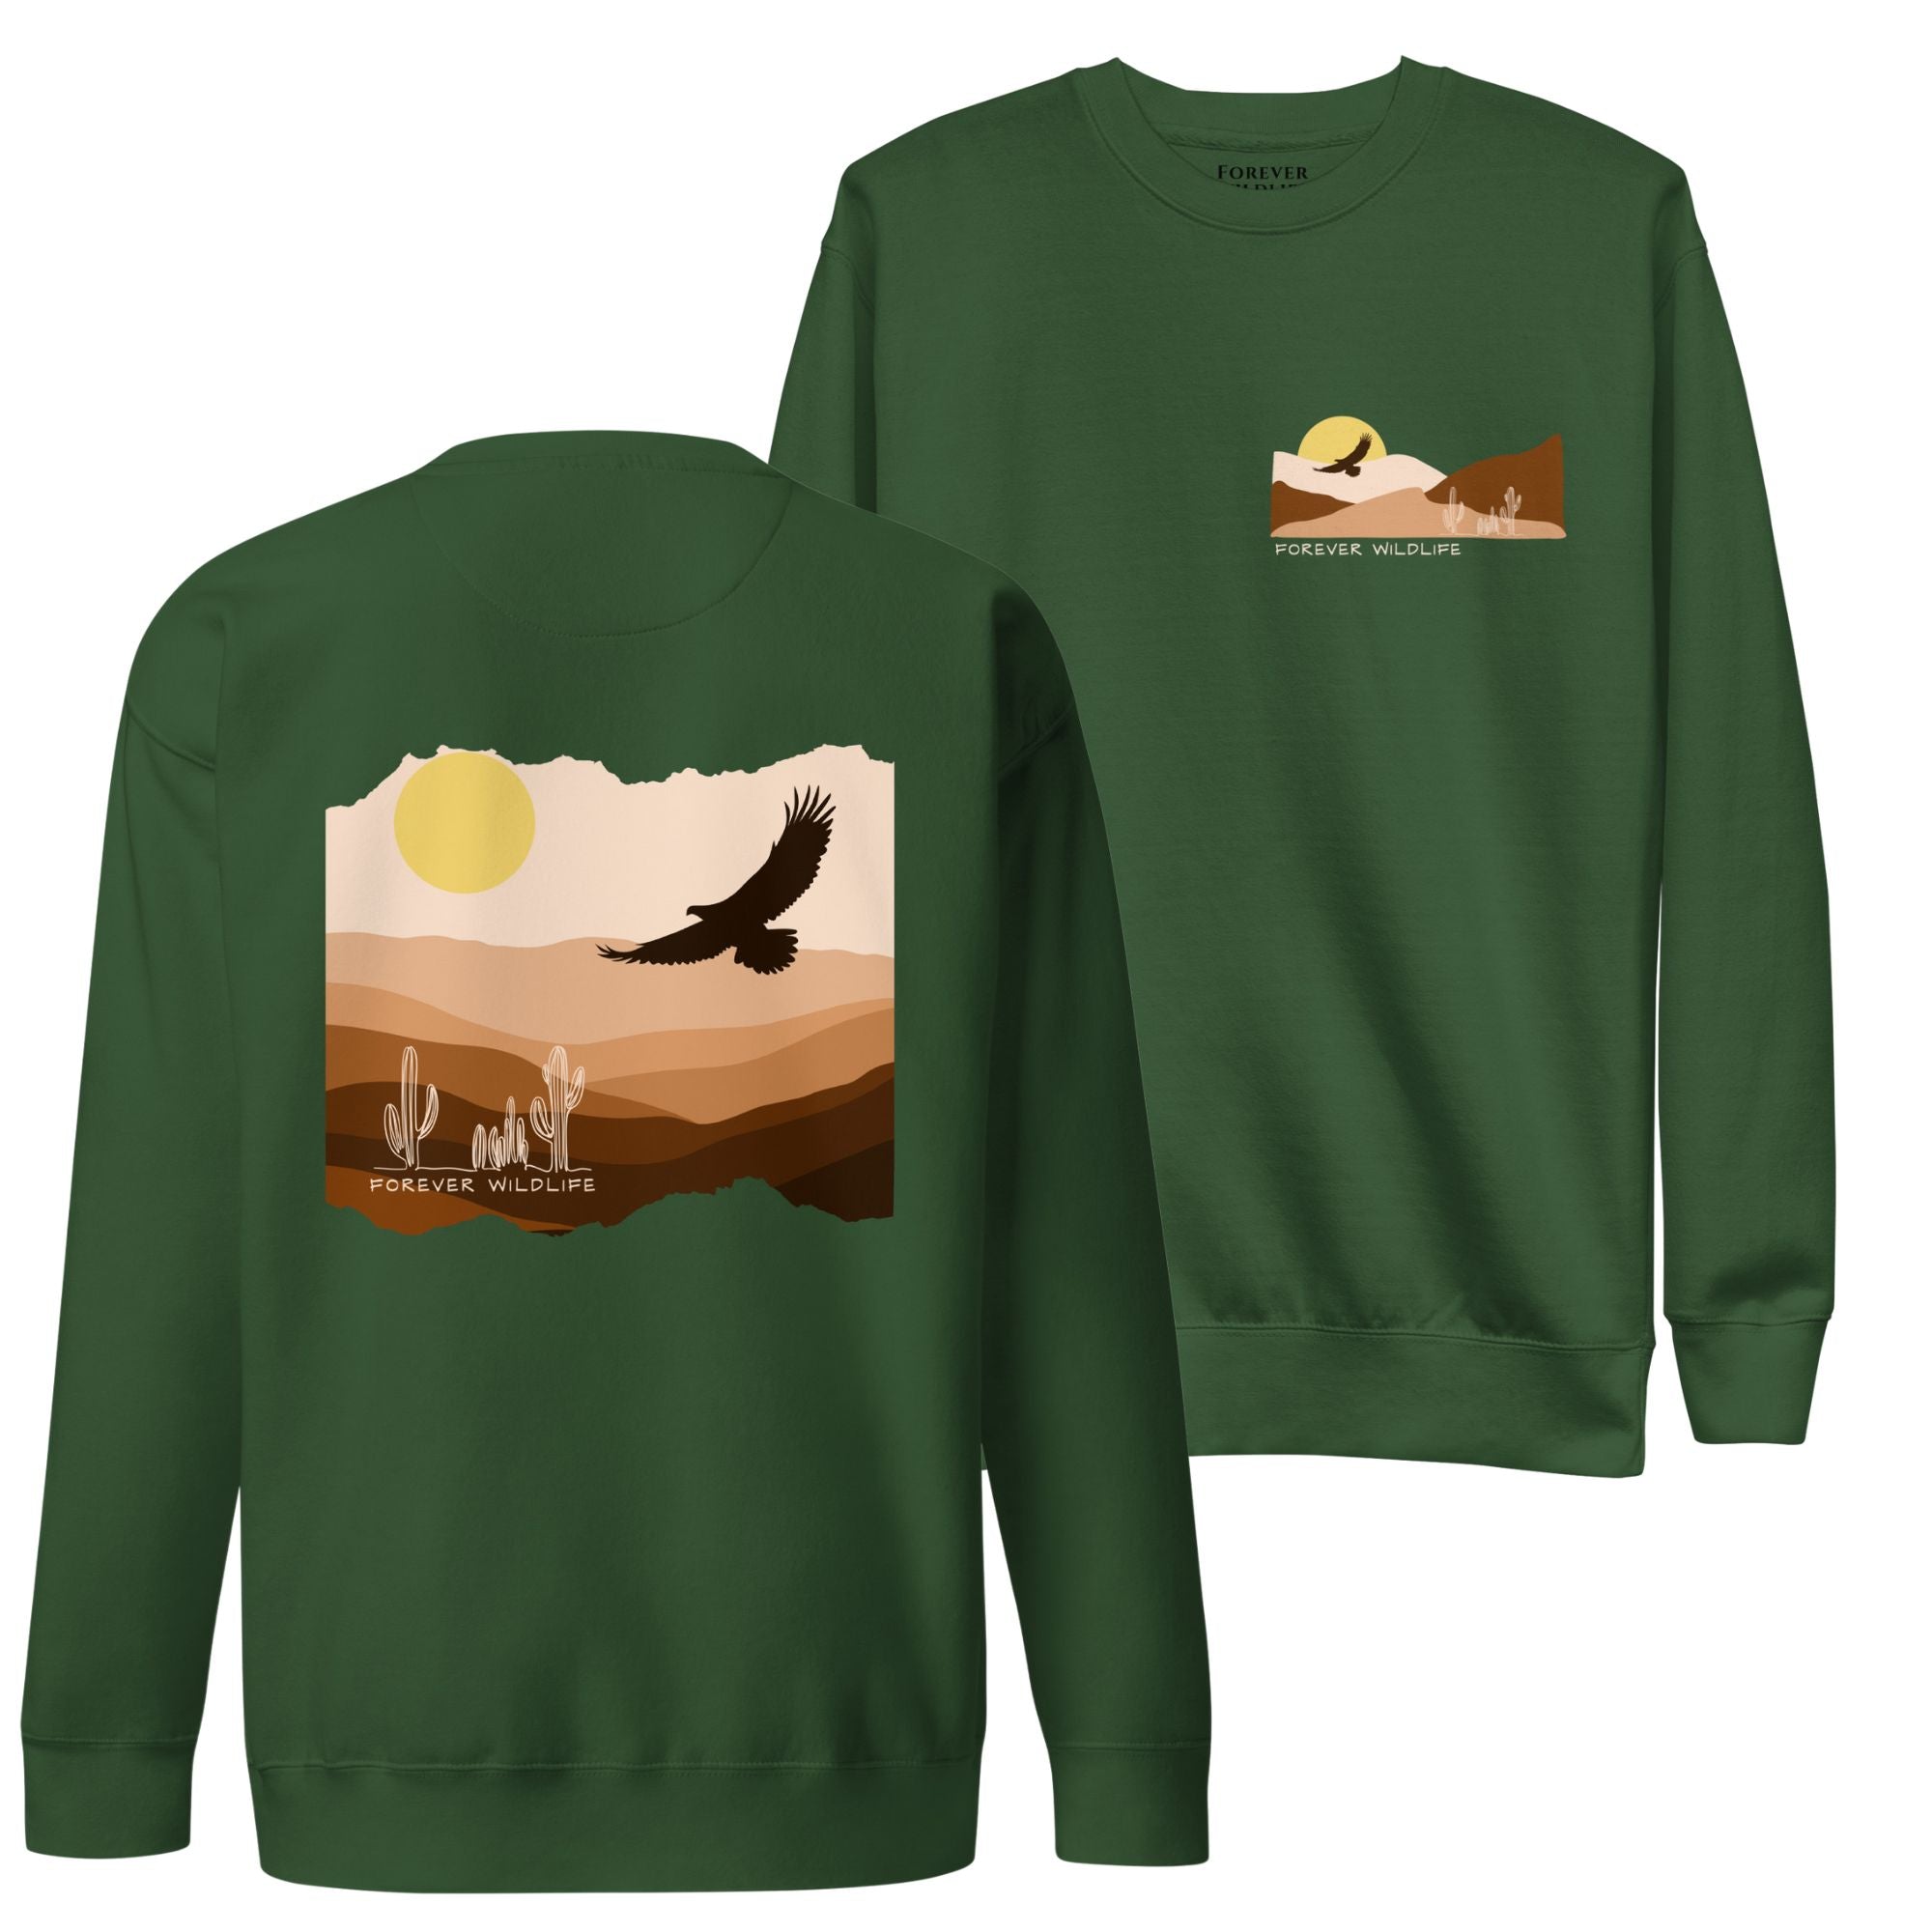 Eagle Sweatshirt, beautiful forest green Eagle sweatshirt with eagle soaring over the desert part of Wildlife Sweatshirts collection.